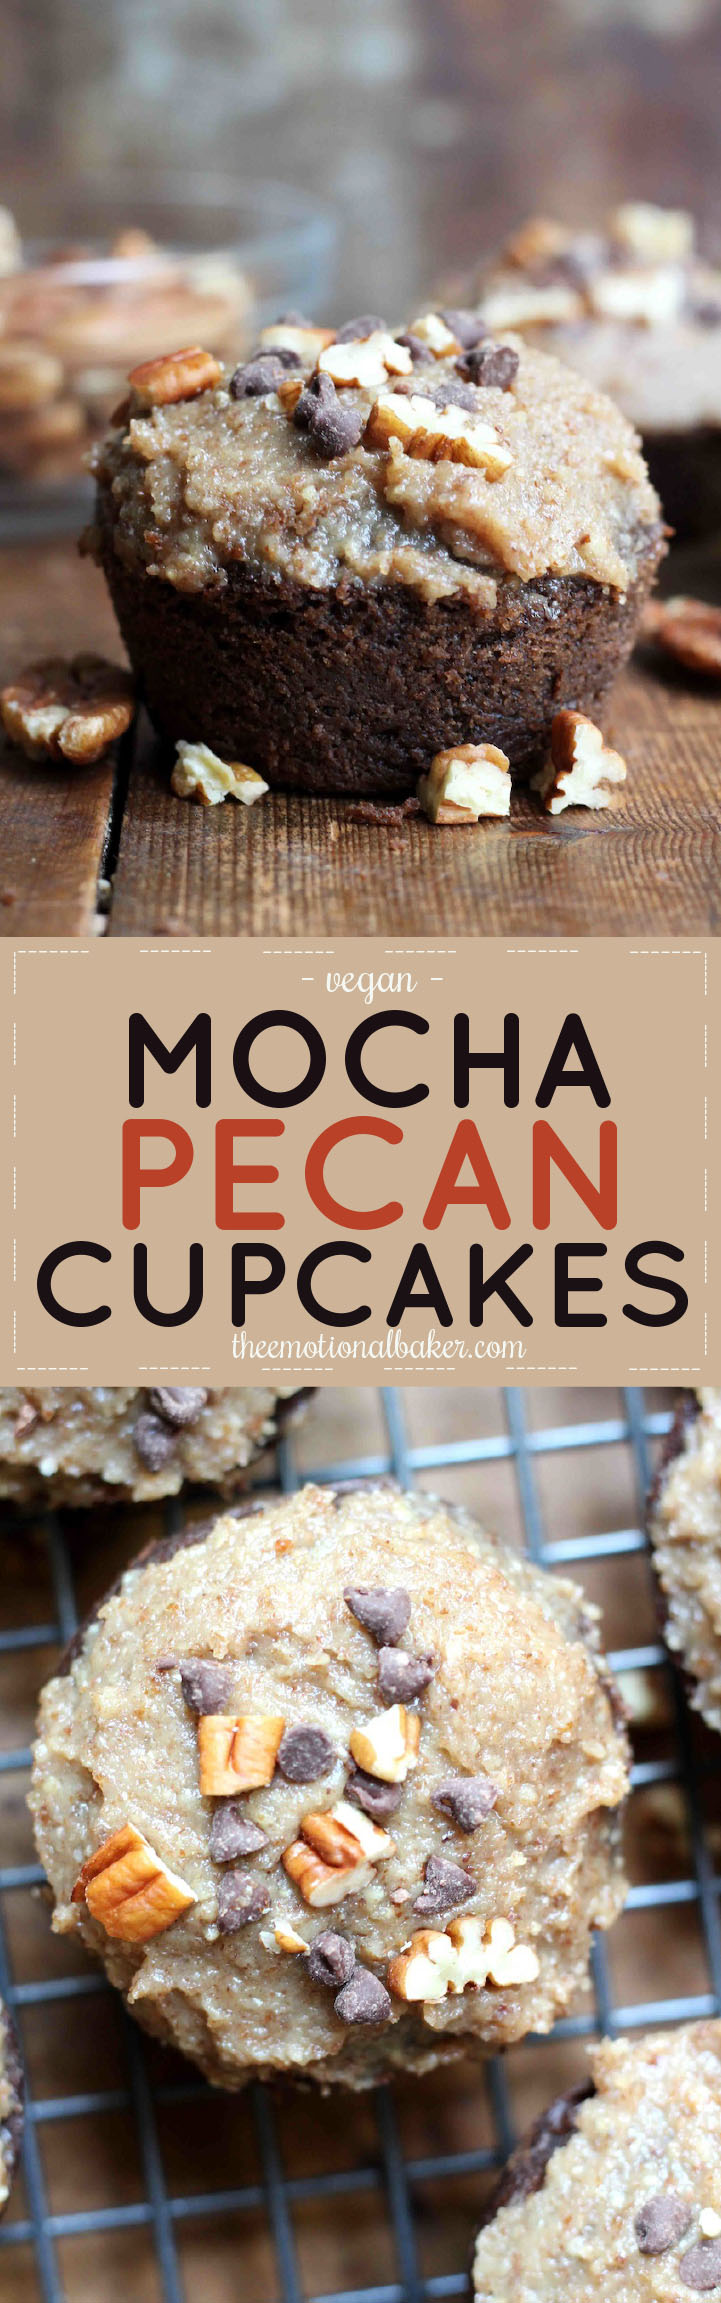 Get your chocolate and coffee fix with a Mocha Pecan Cupcake featuring white whole wheat flour, maple syrup and coconut oil.